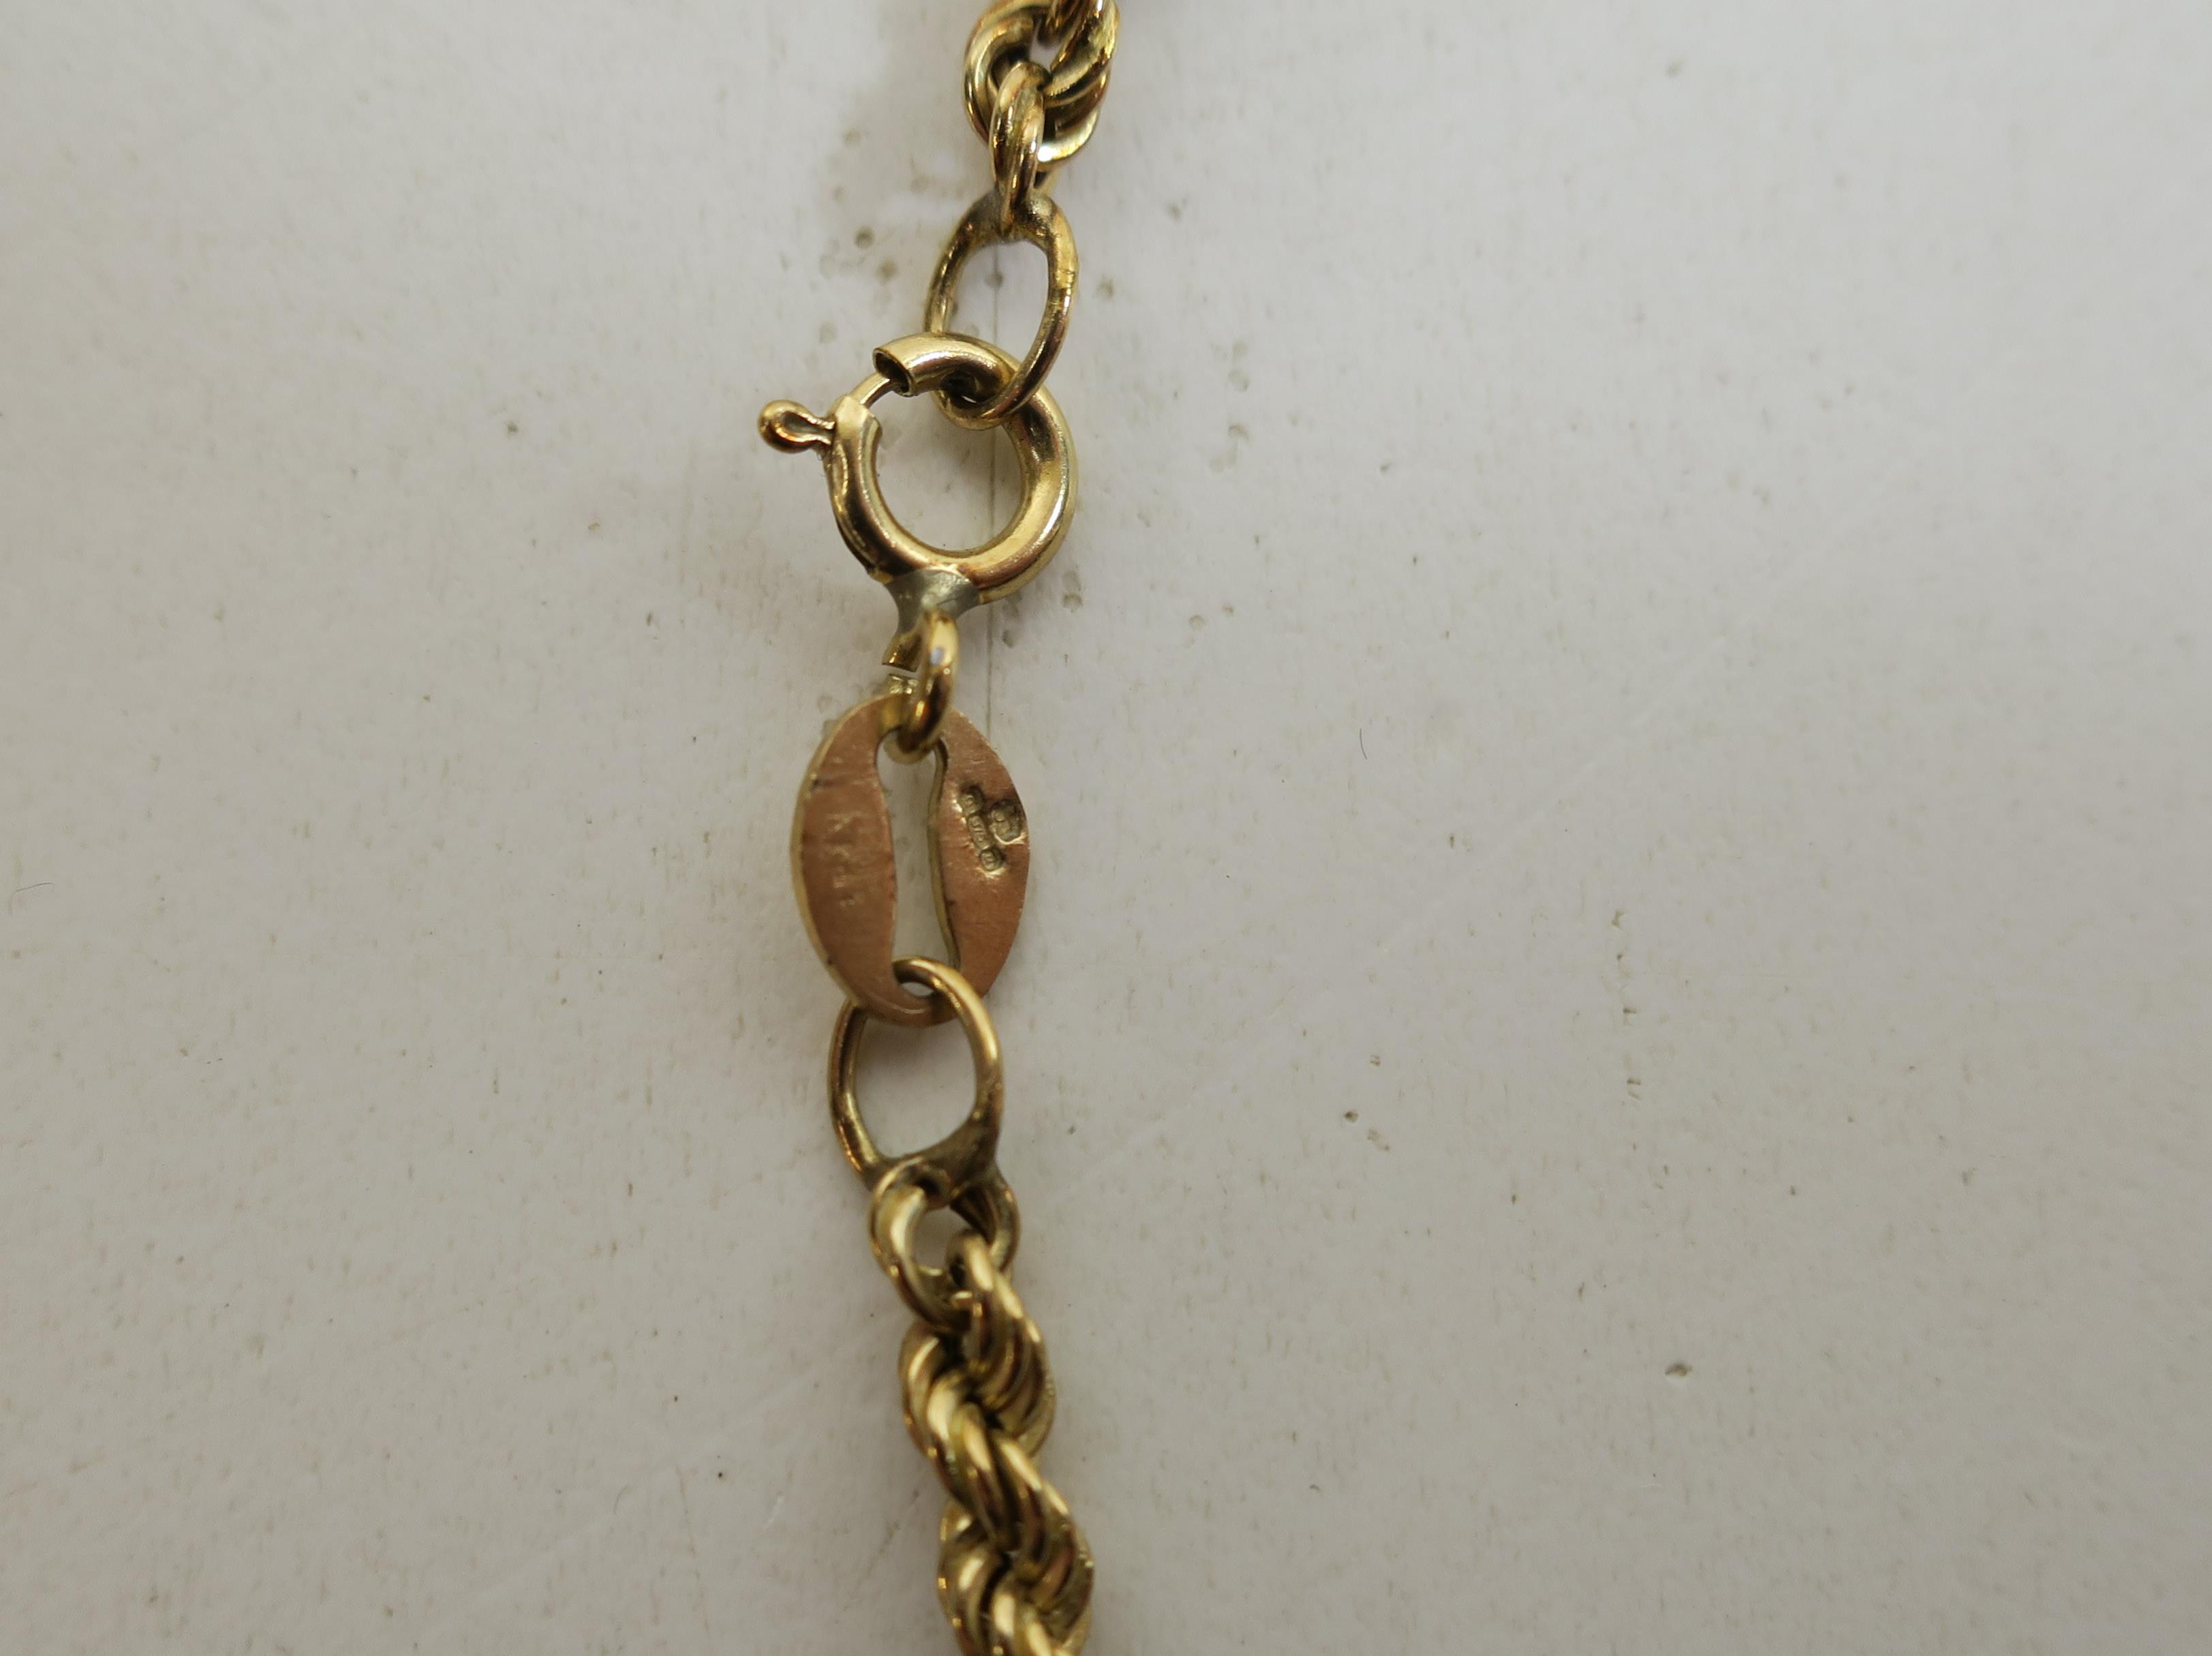 This is a Timed Online Auction on Bidspotter.co.uk, Click here to bid. A 9ct Gold Rope Twist - Bild 5 aus 5